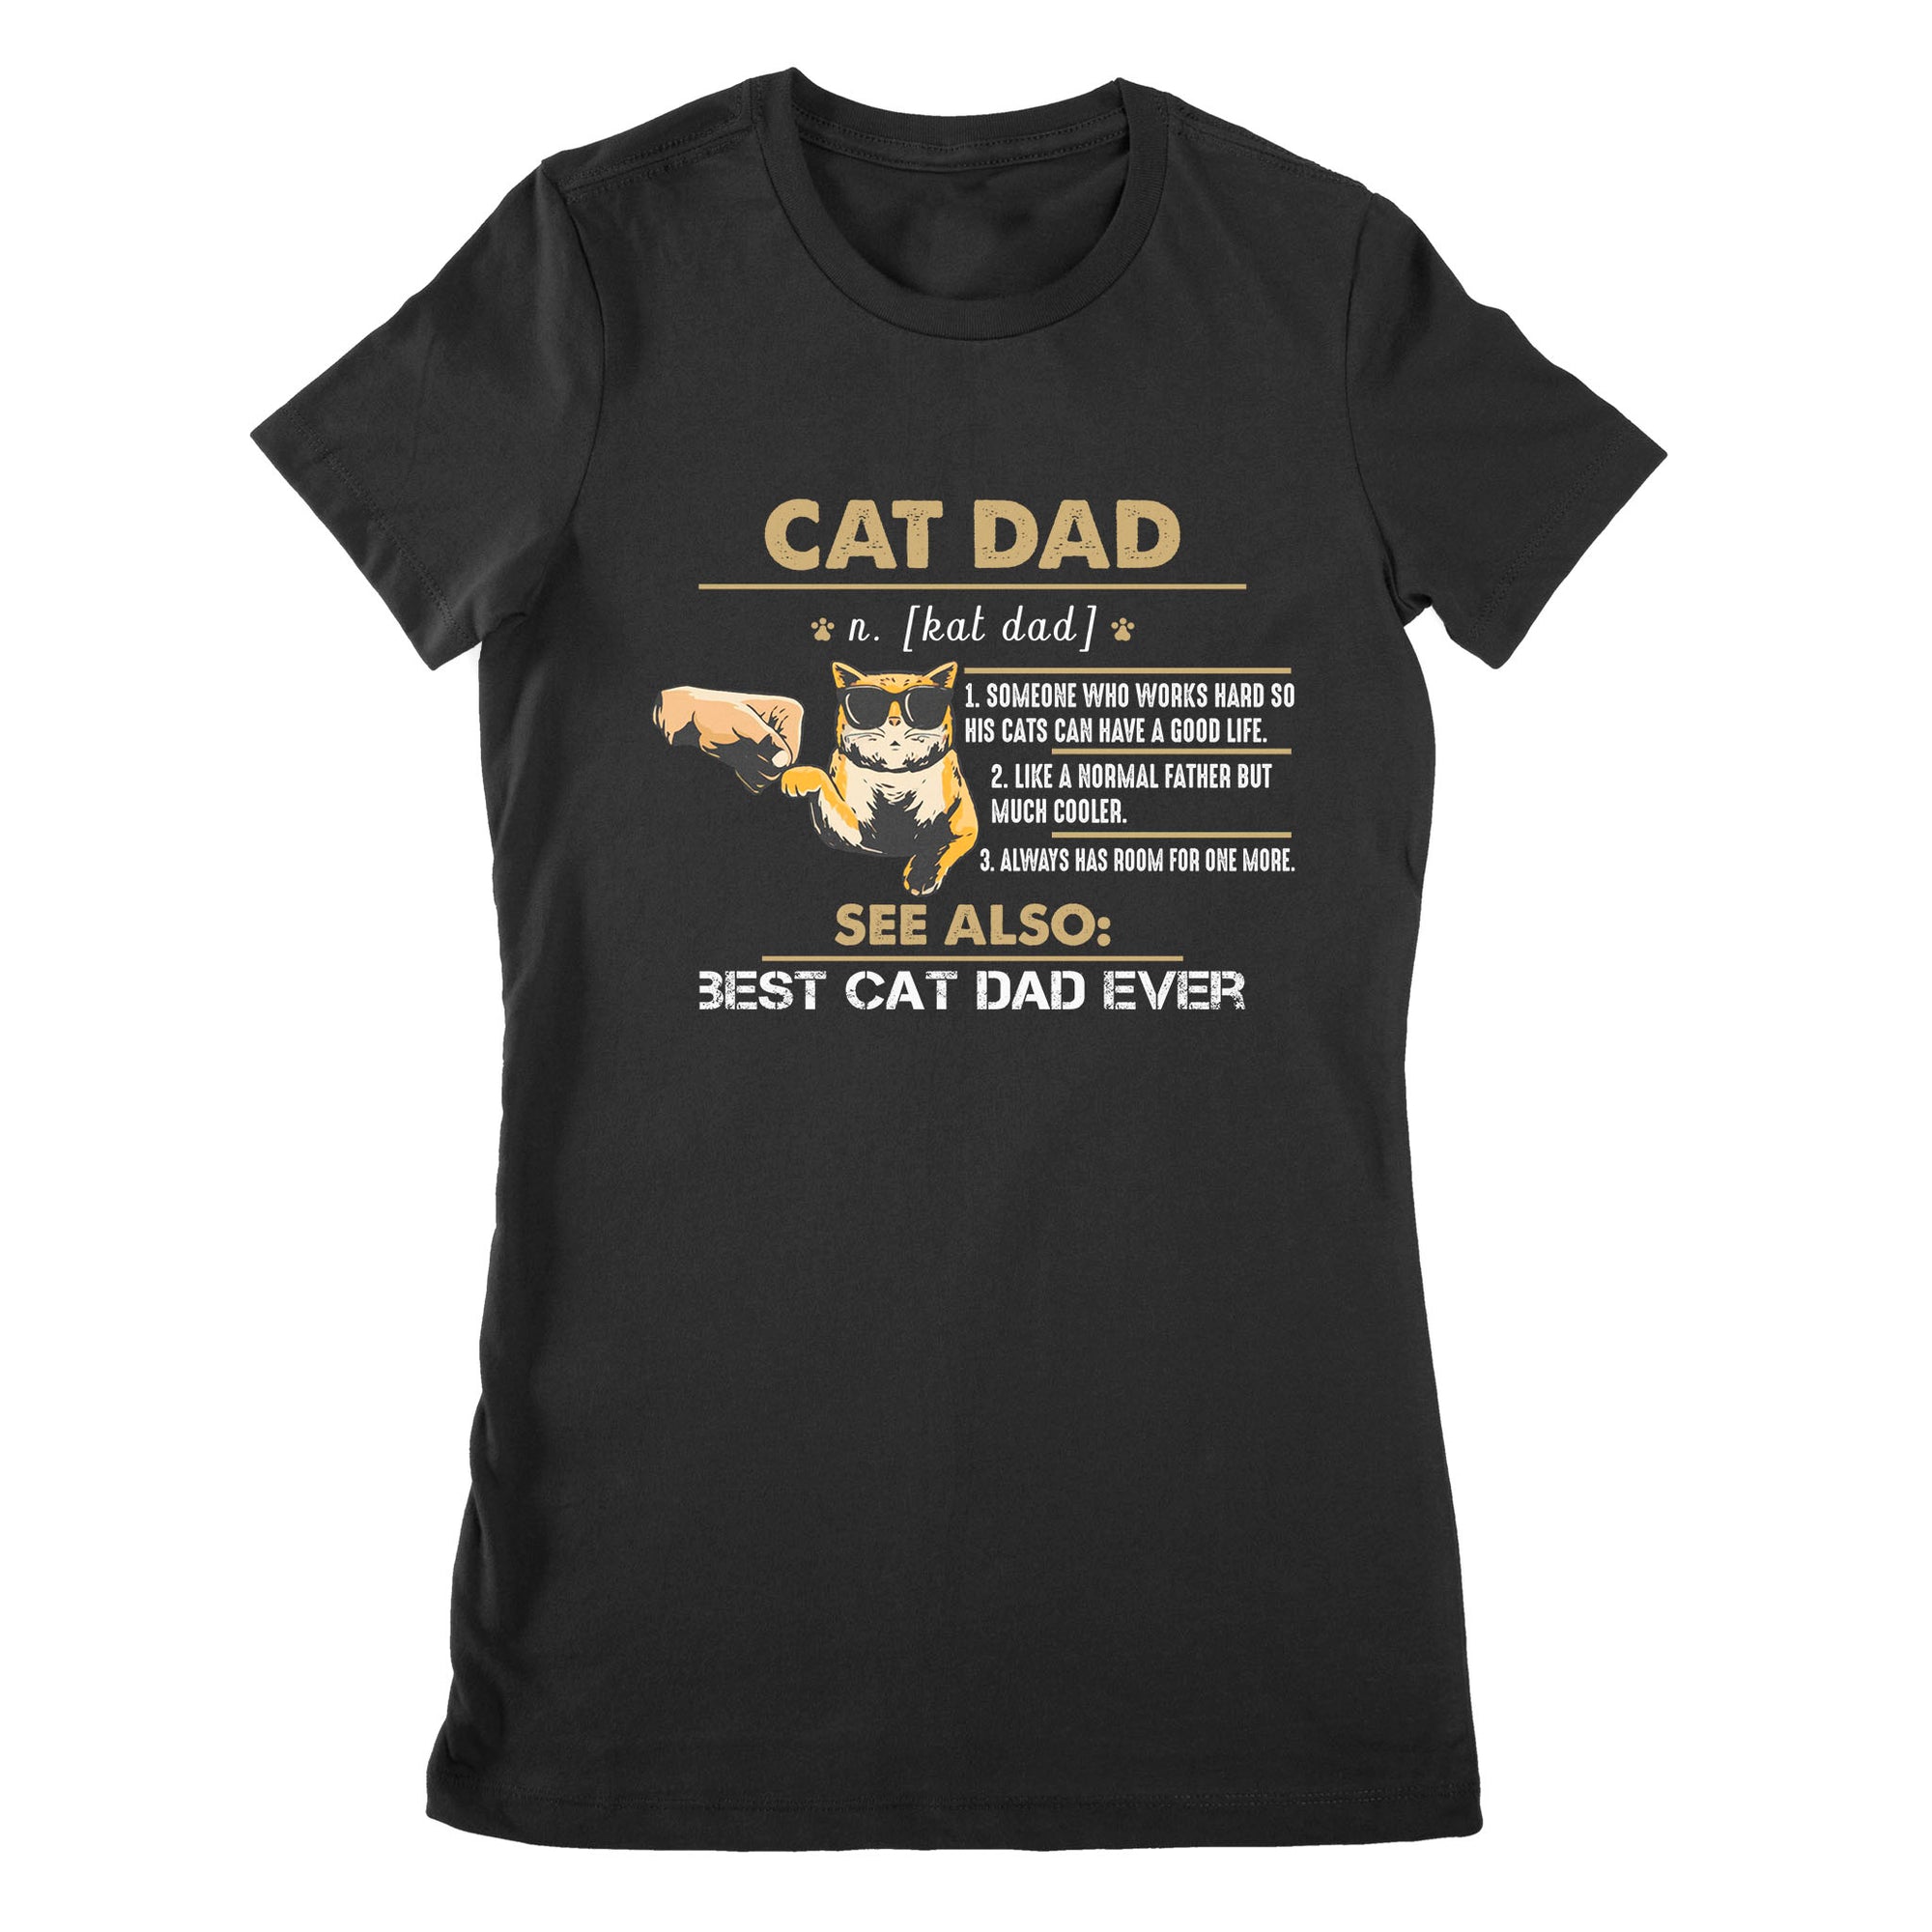 Premium Women's T-shirt - Cat Lover Cat Dad Someone Who Works Hard So His Cats Can Have A Good Life Like A Normal Father But Much Cooler